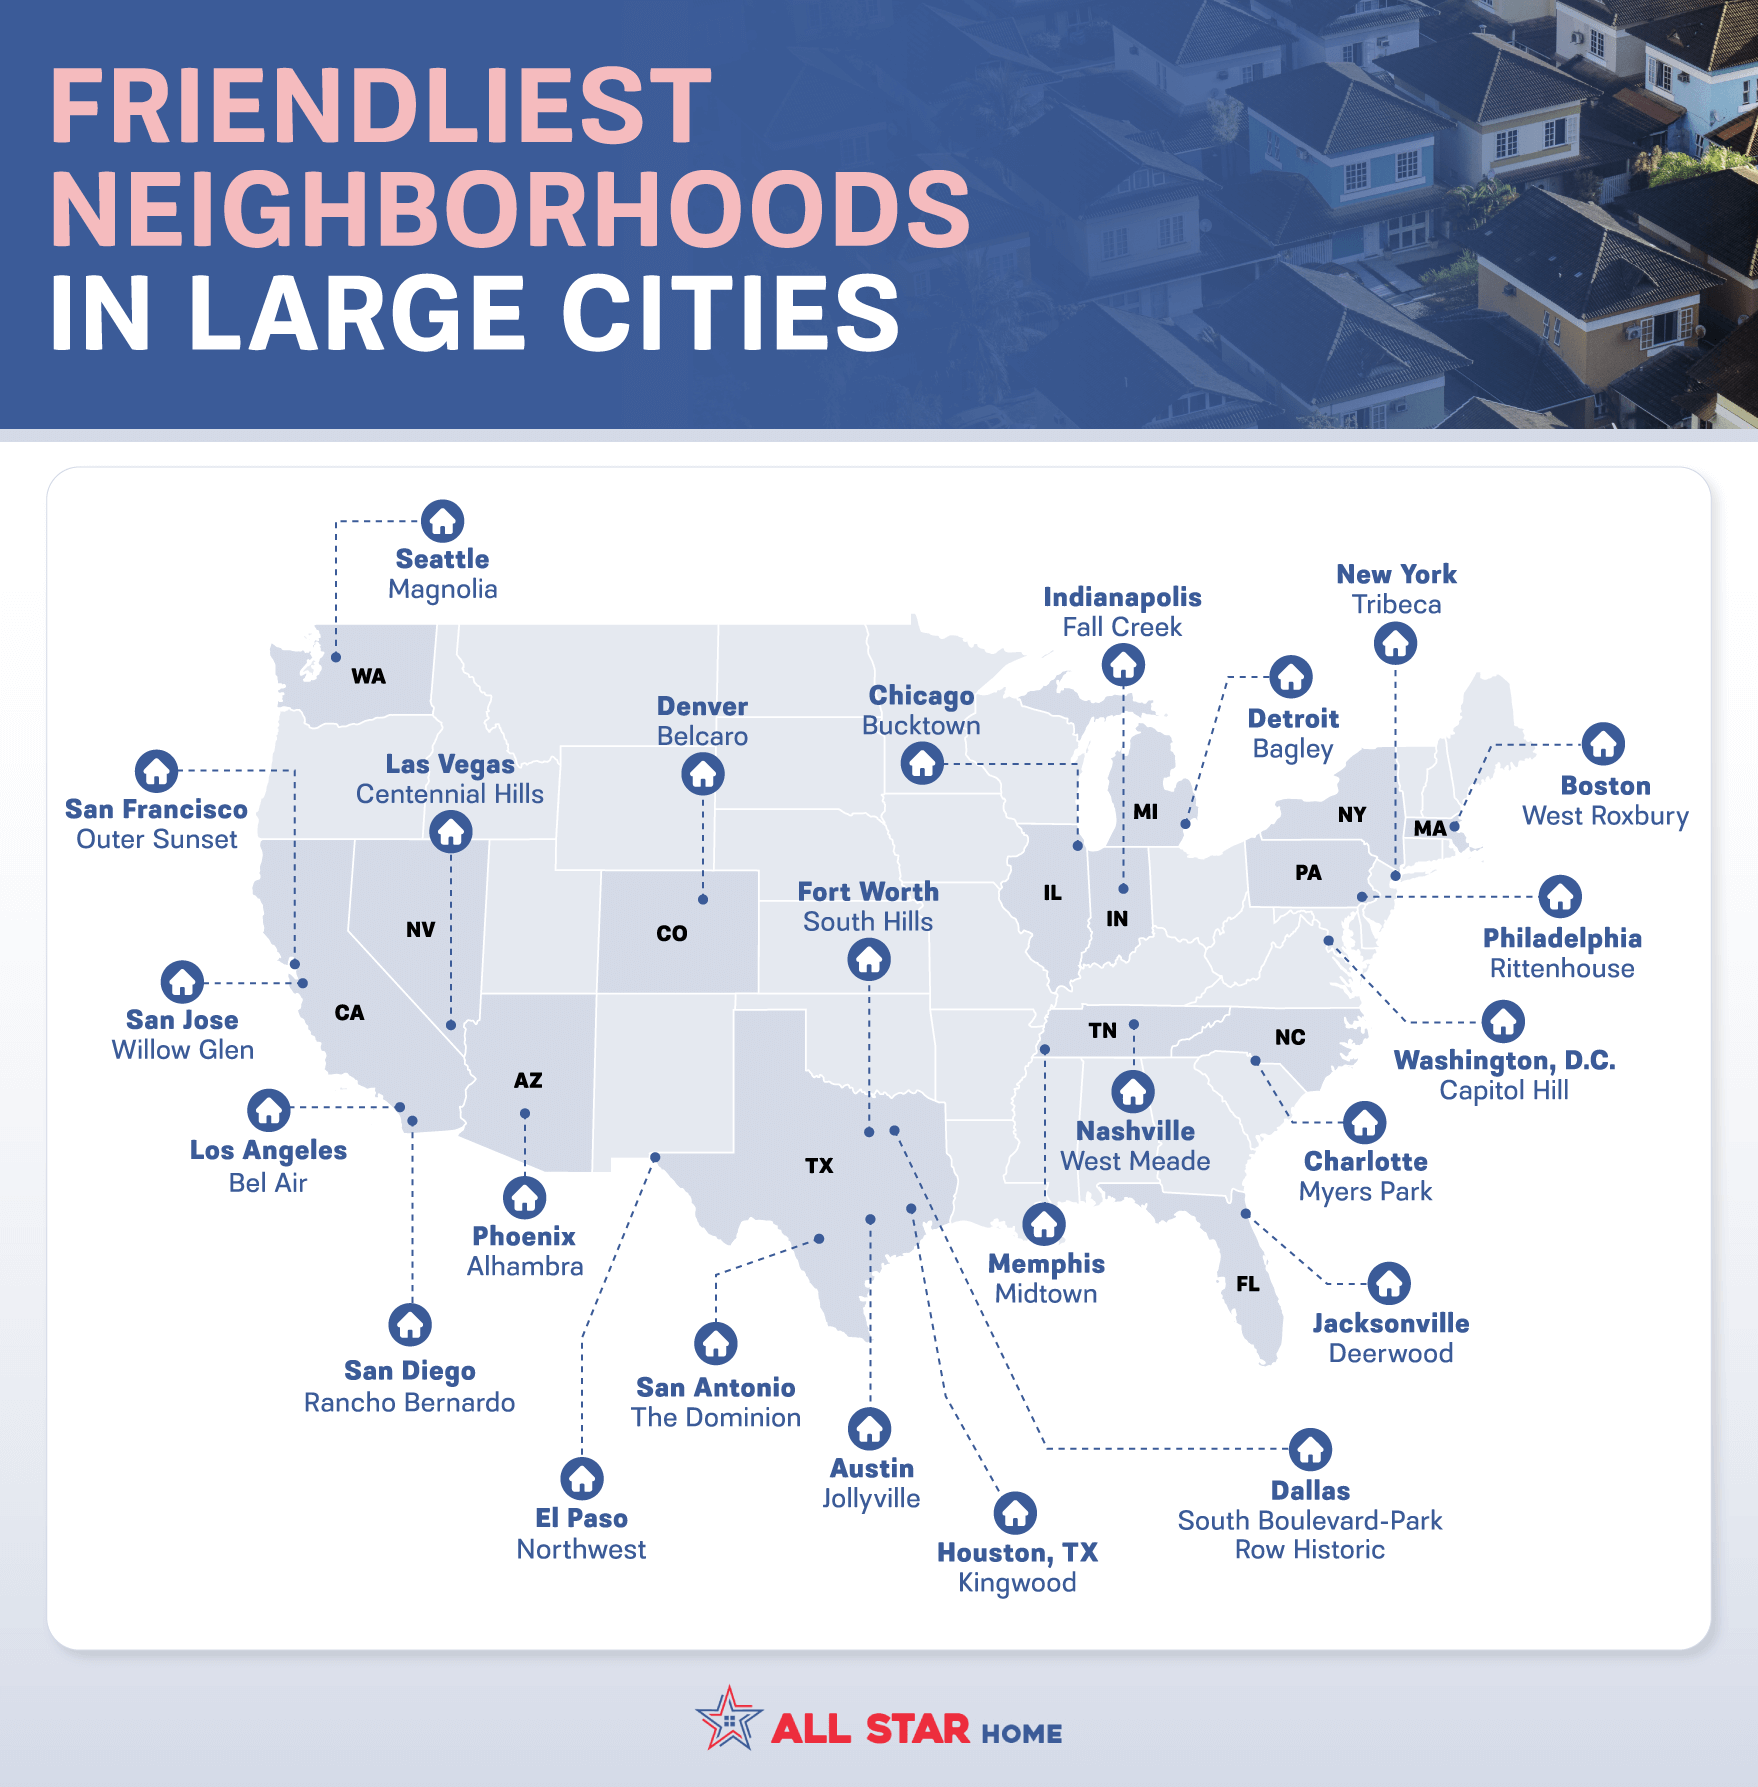 The friendliest well-known businesses in America